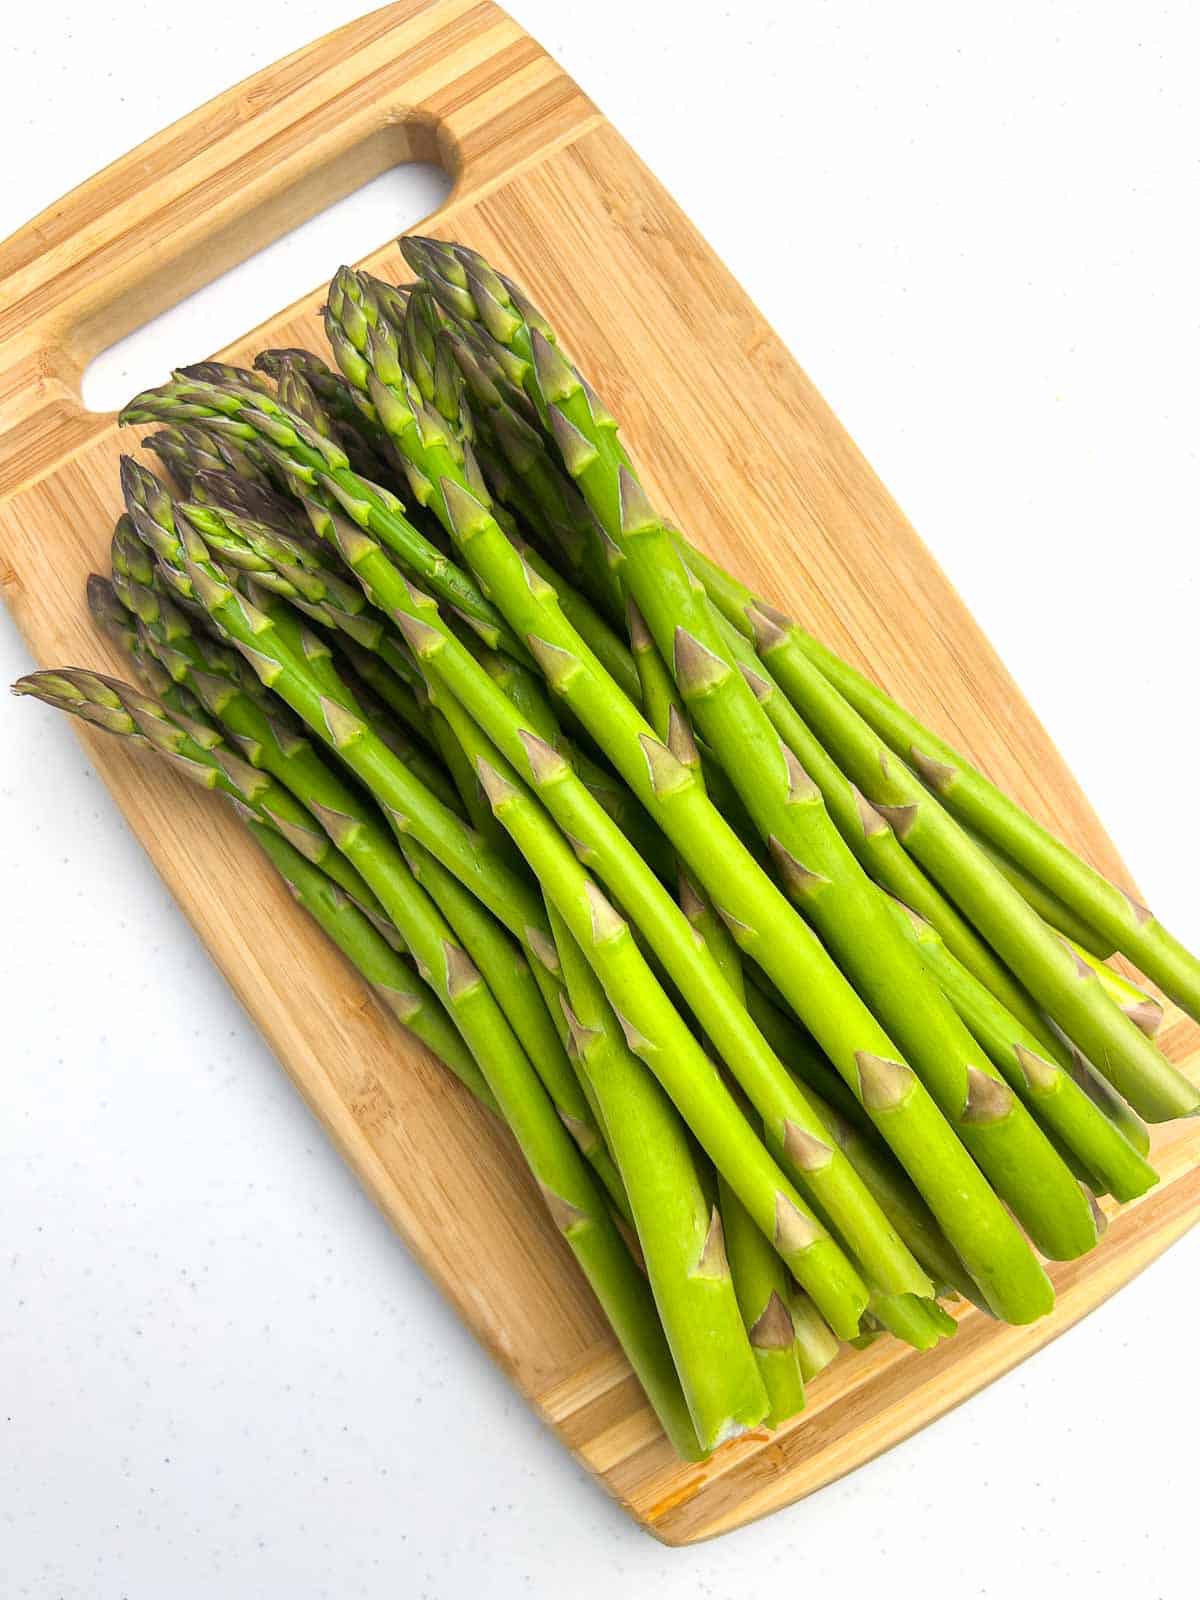 Fresh asparagus spears with ends trimmed on a cutting board.